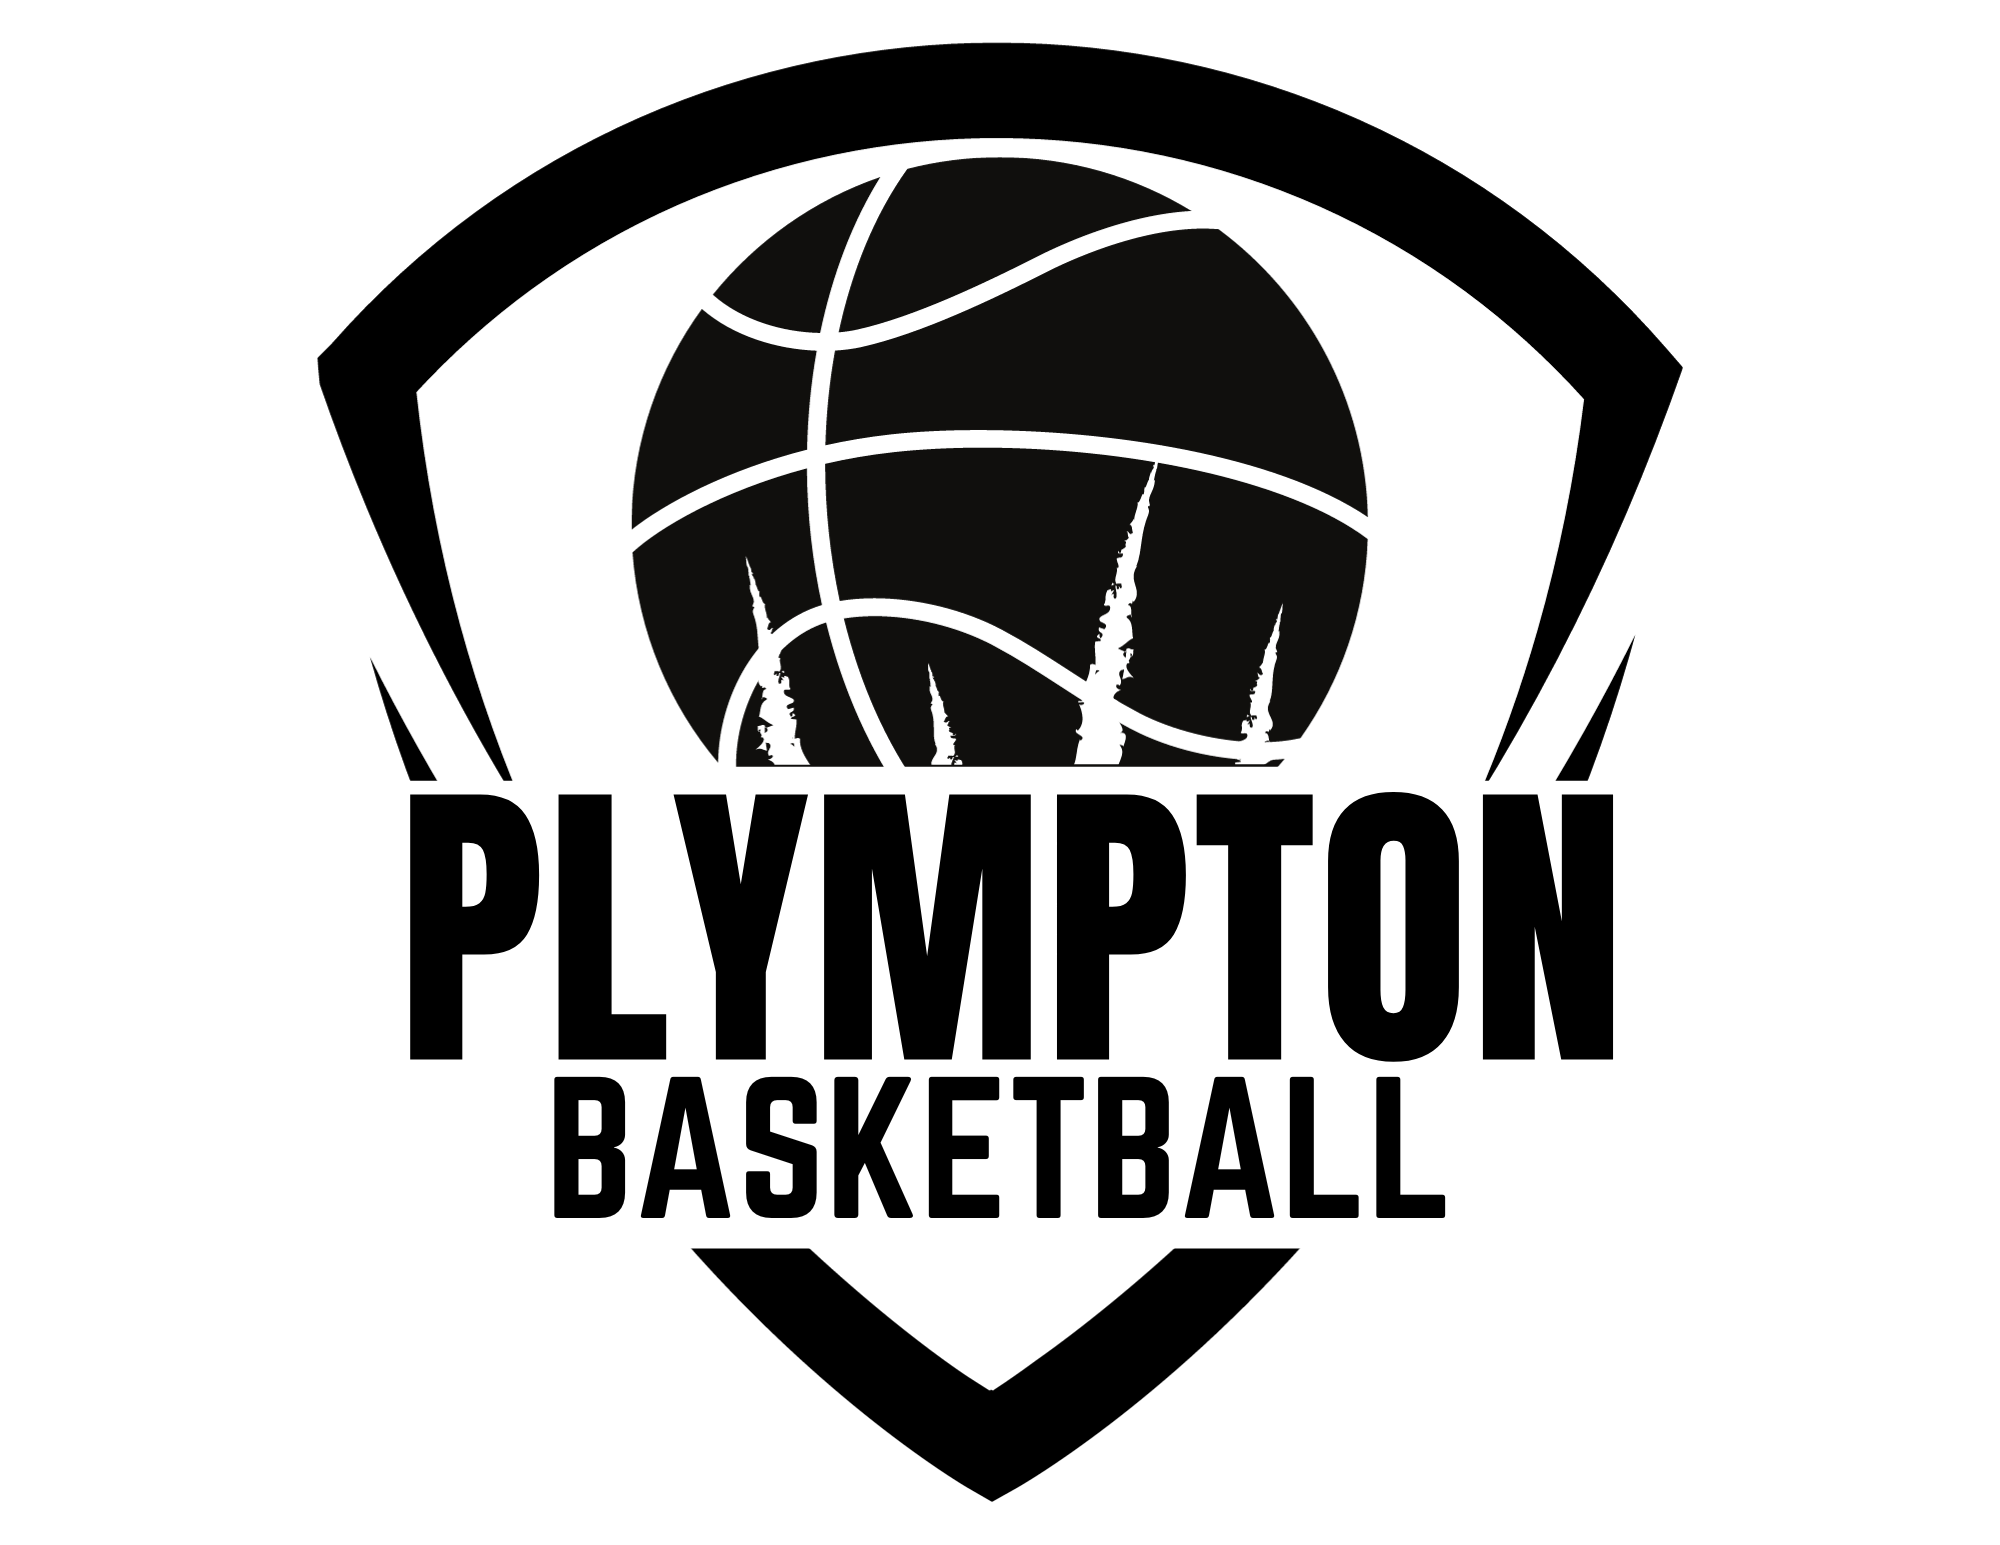 Basketball - Plympton Athletic Youth Sports